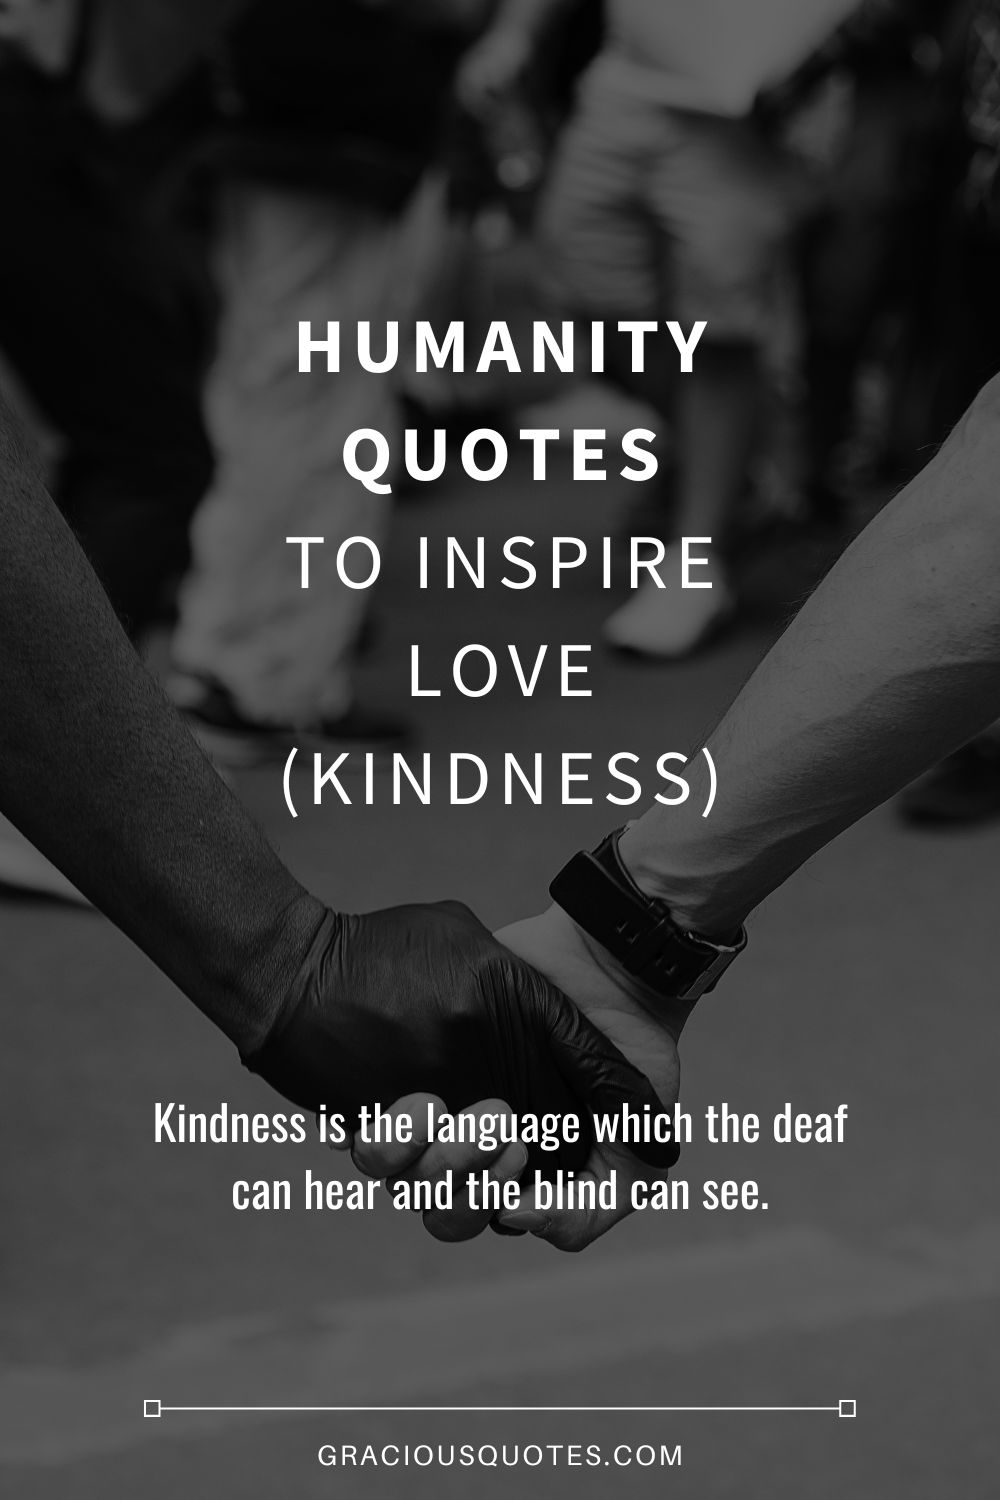 Humanity Quotes to Inspire Love (KINDNESS) - Gracious Quotes